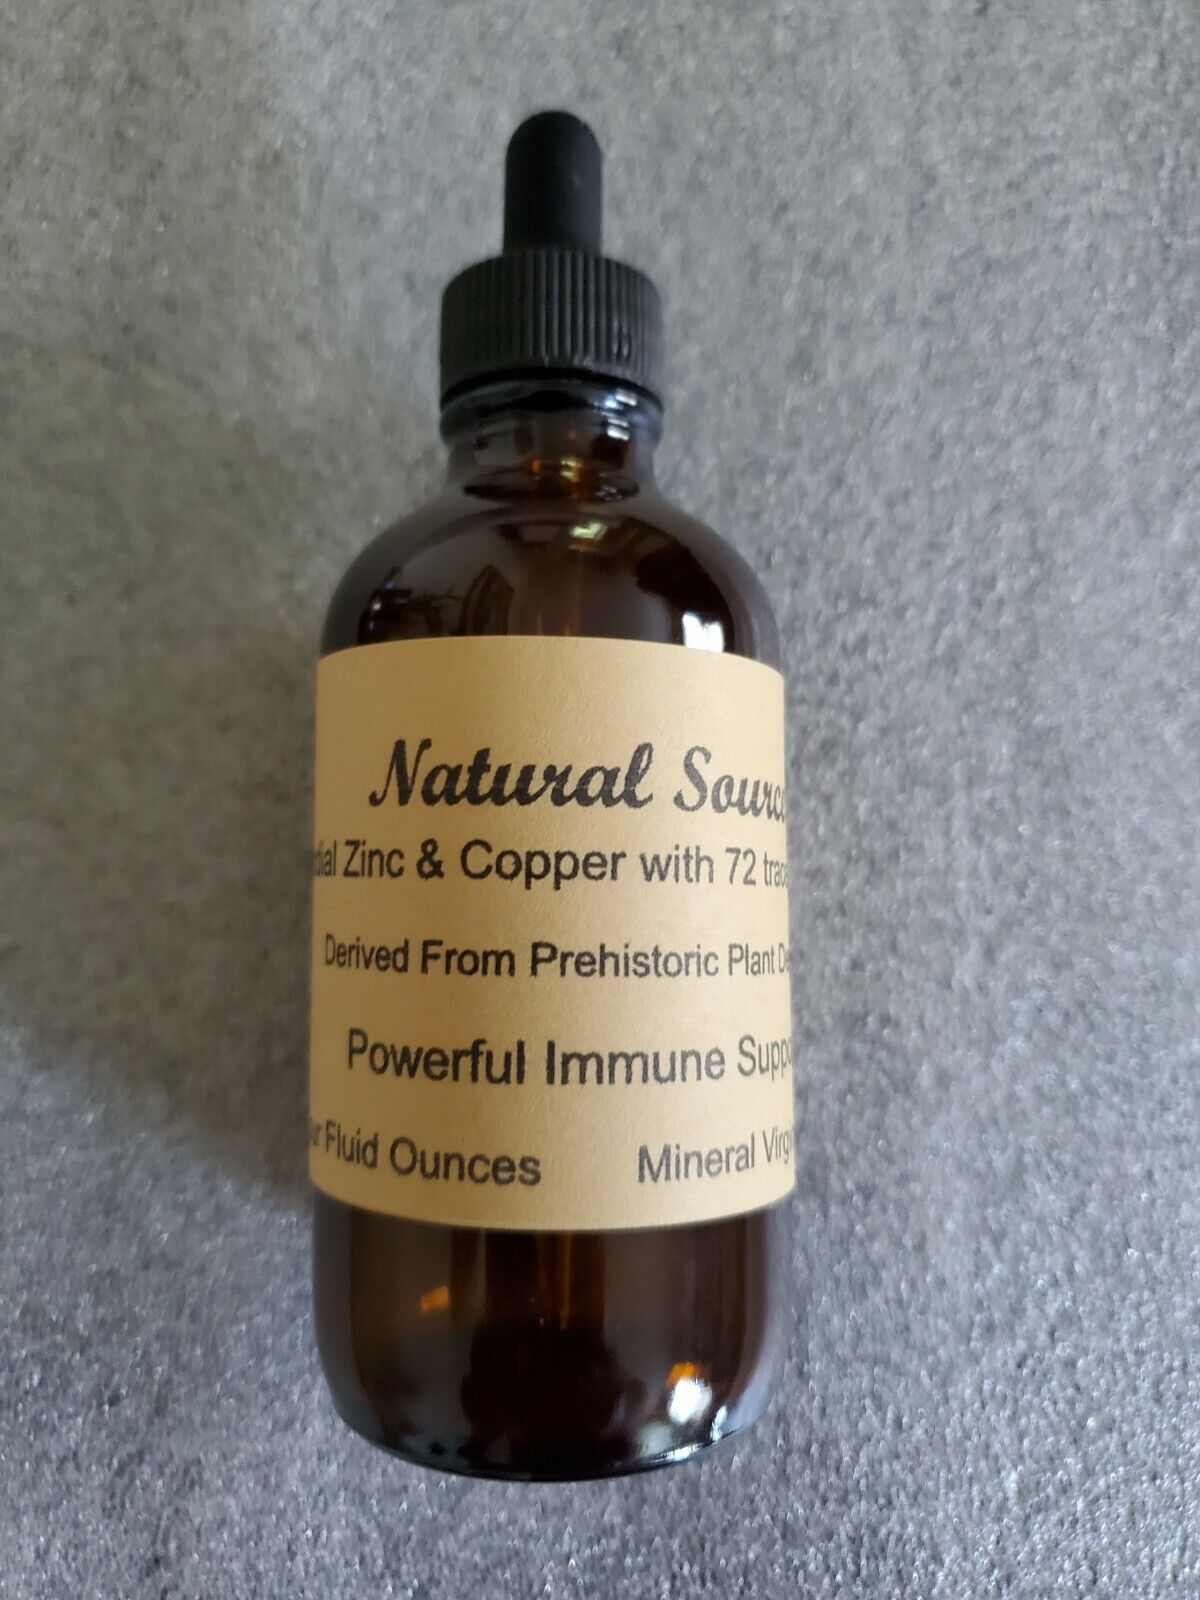 Natural Source Colloidal Zinc & Copper with 72 trace minerals - Two oz dropper